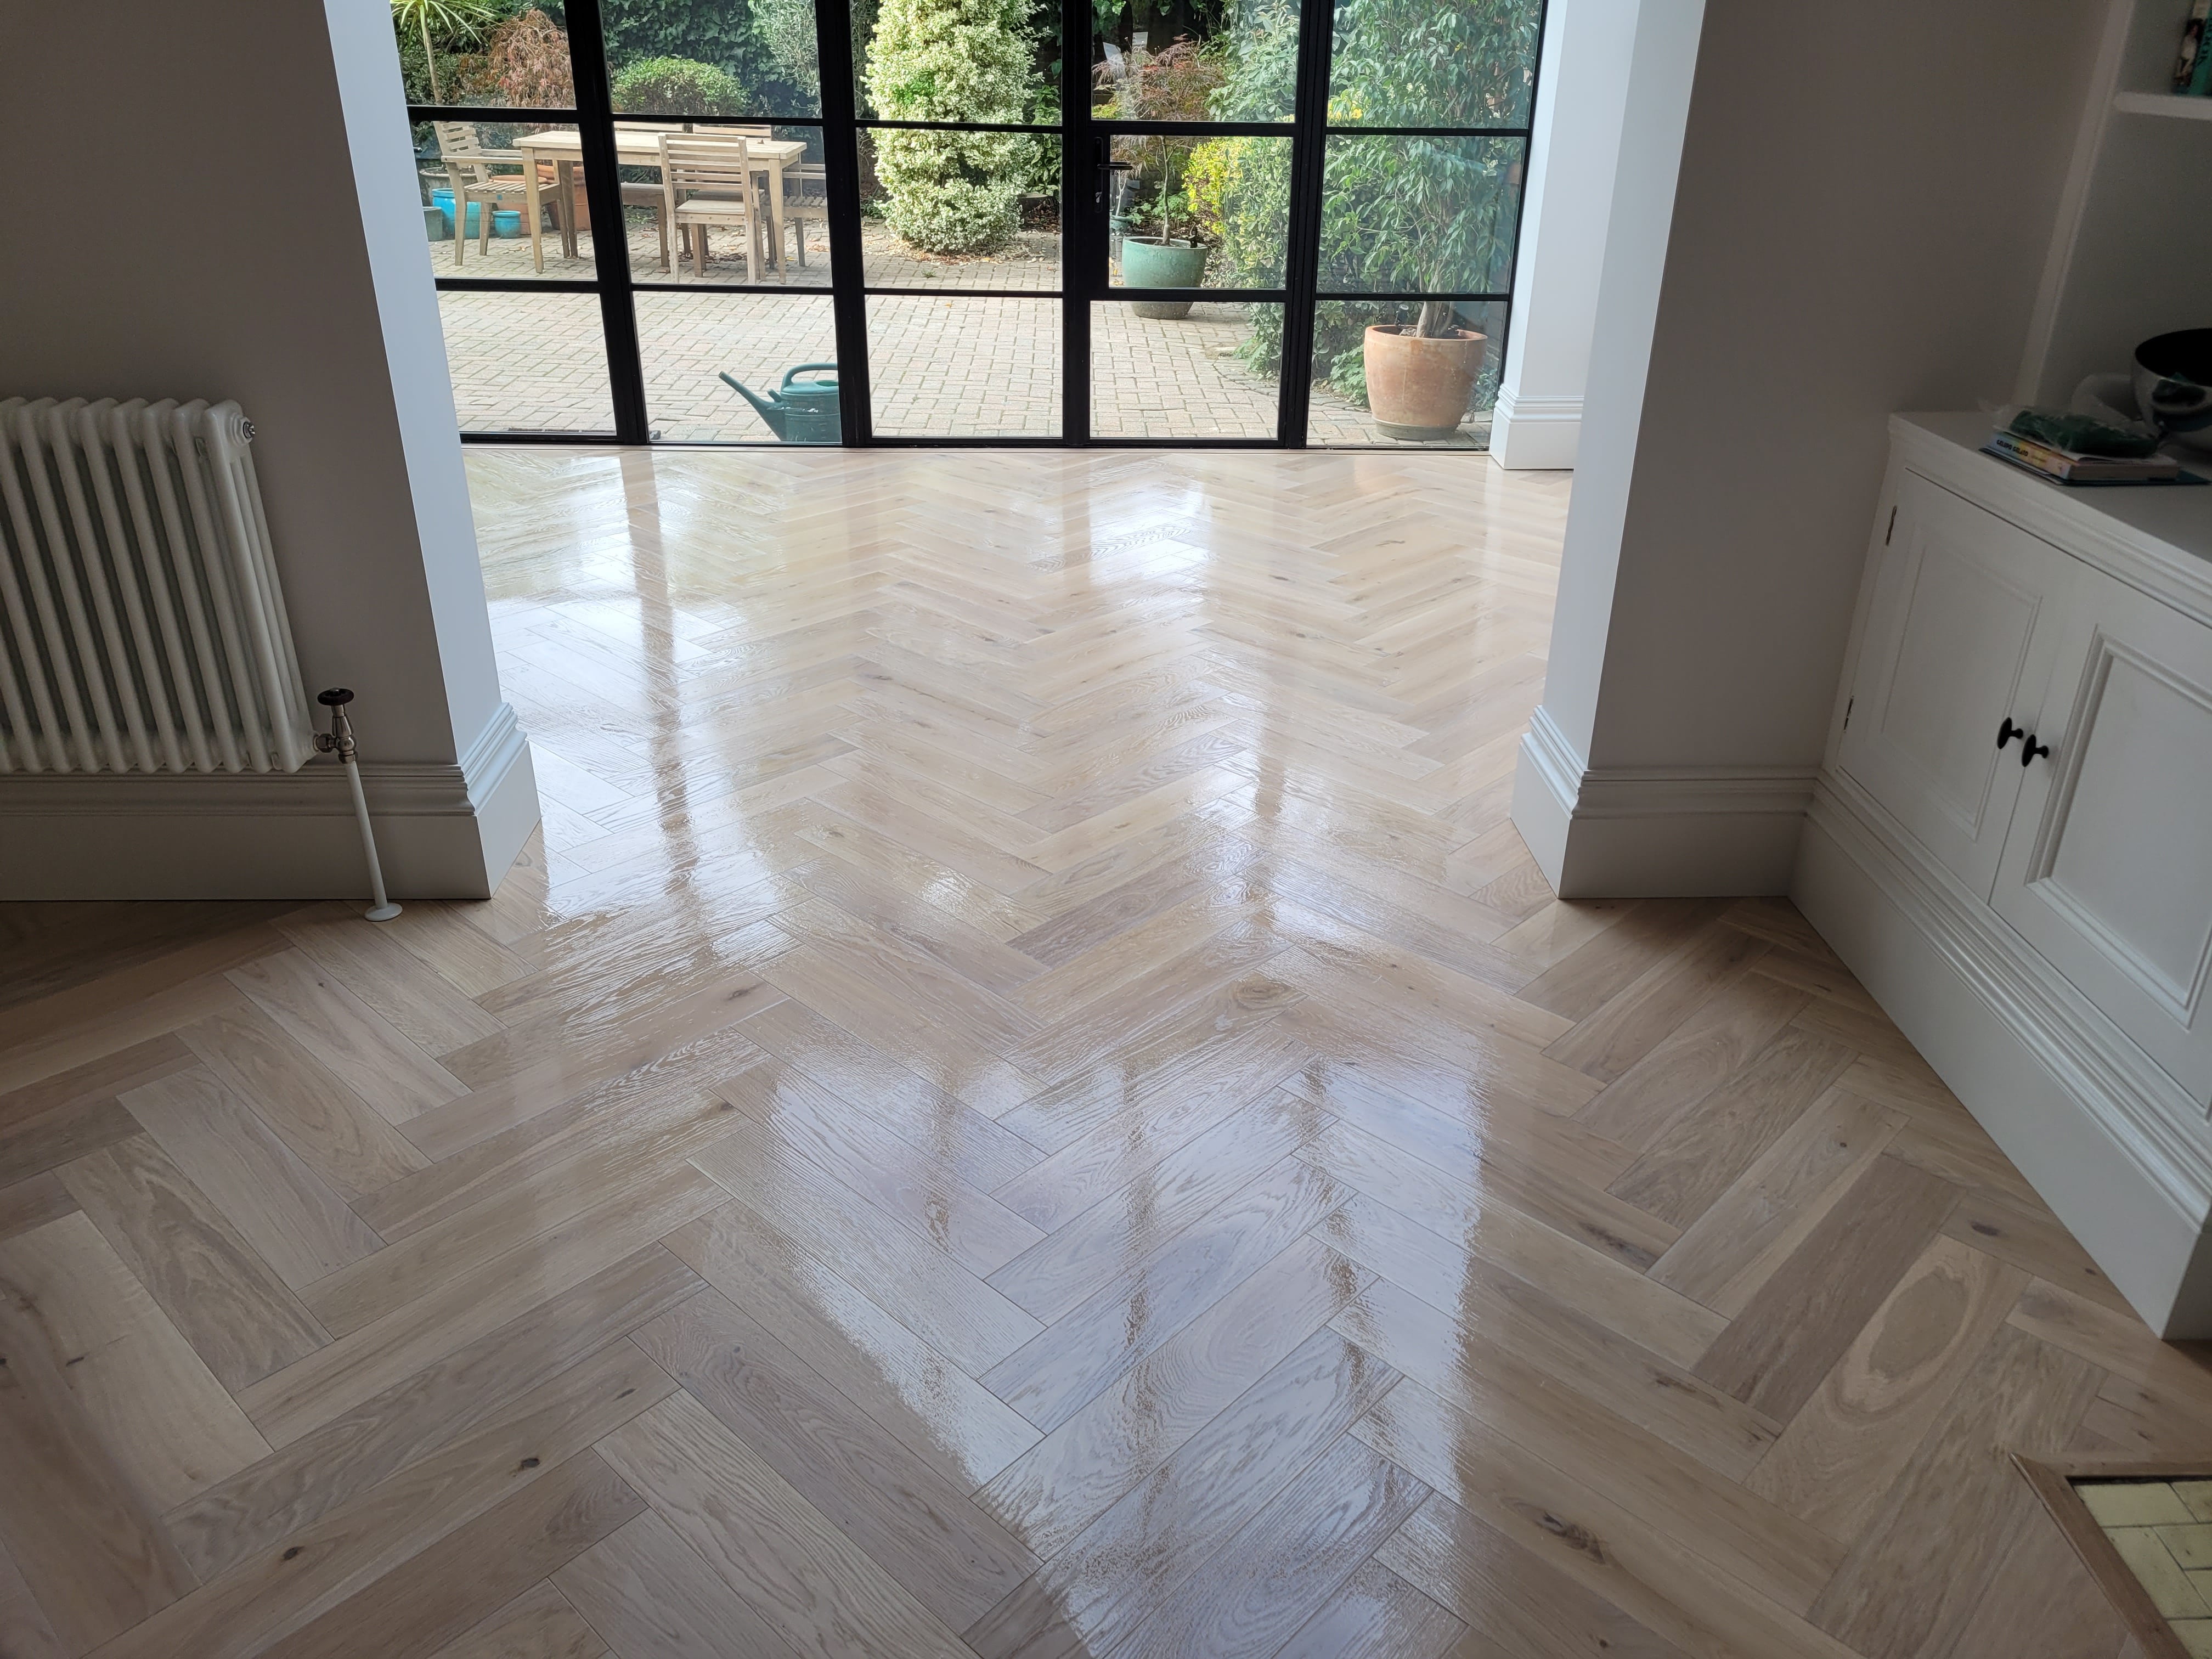 A Chevron parquet floor has been masterfully restored through sanding, buffing, and whitewashing with Bona 2K Frost, then treated with two coats of Traffic HD 10% sheen matte lacquer, resulting in a stunning, long-lasting finish.